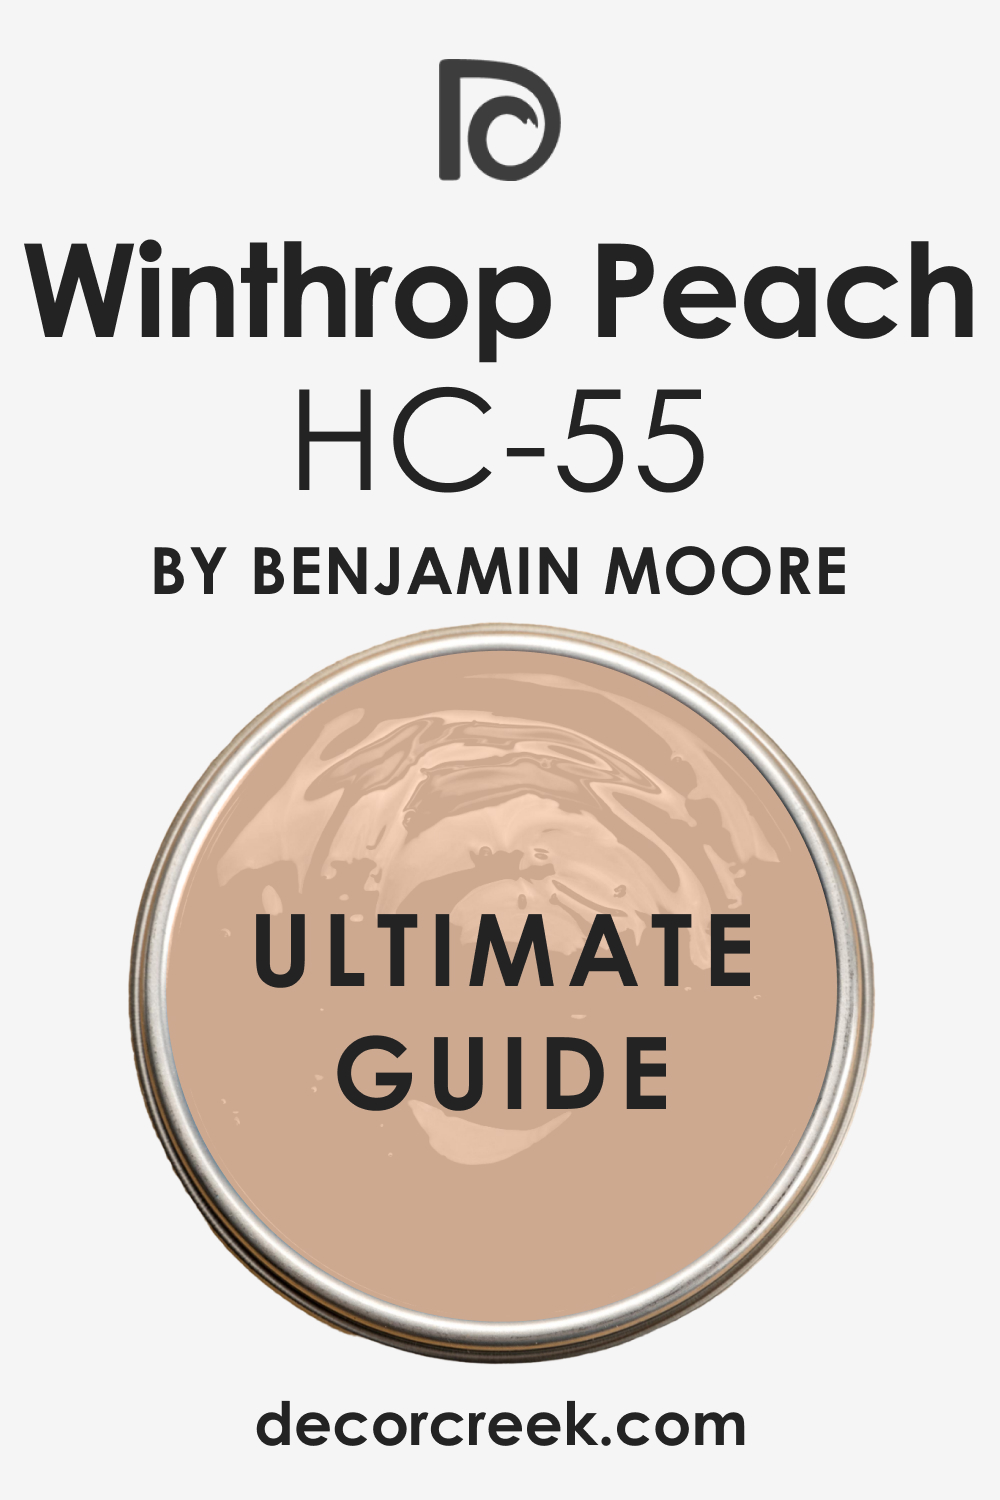 Ultimate Guide. Winthrop Peach HC-55 Paint Color by Benjamin Moore